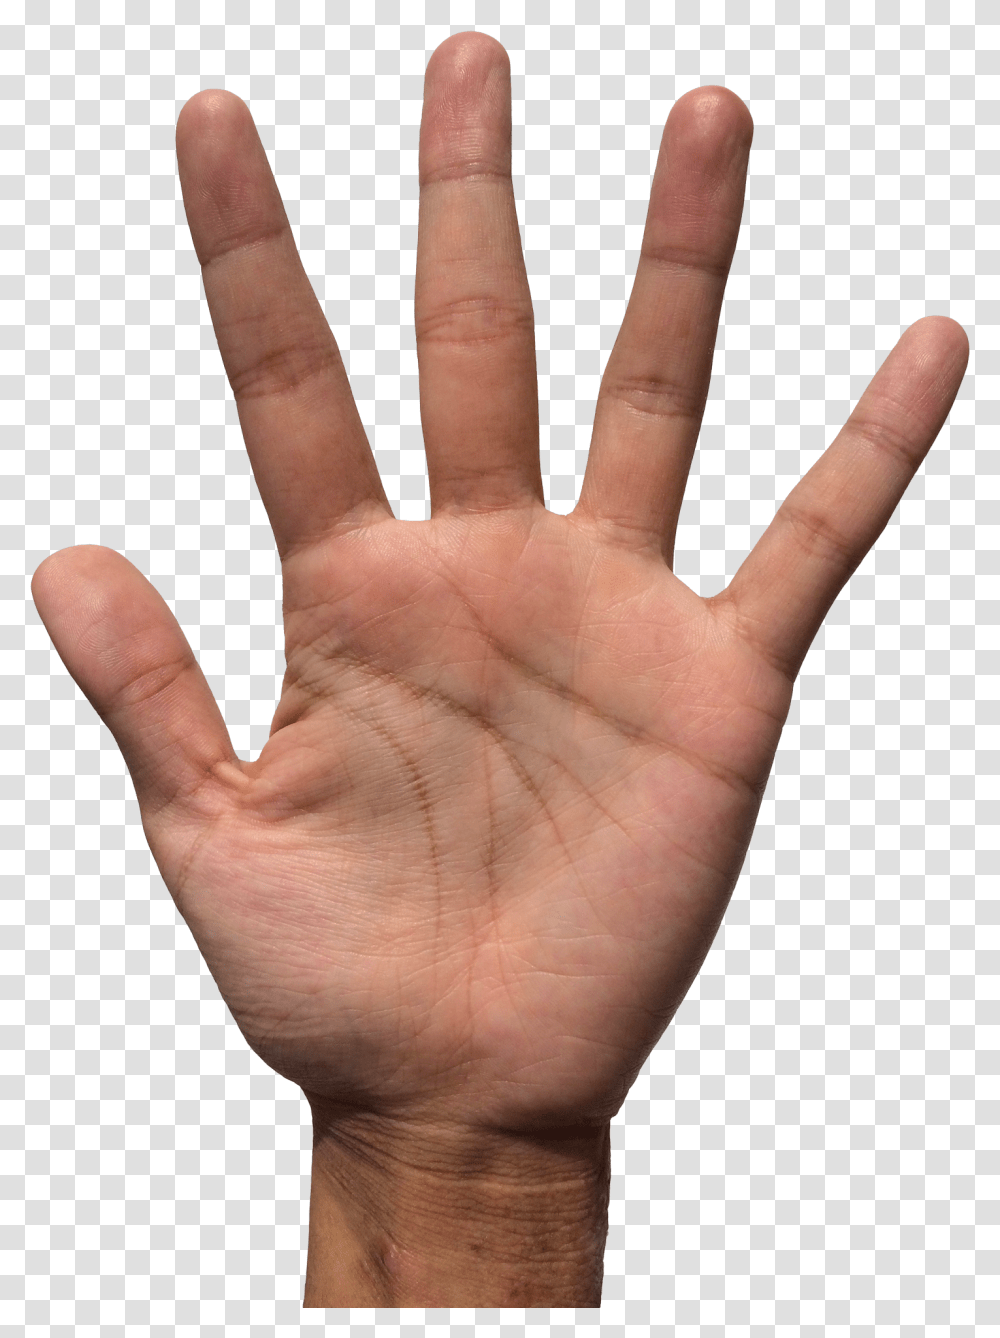 Mobile Phone In Hand Image Pngpix Middle Finger, Person, Human, Wrist Transparent Png